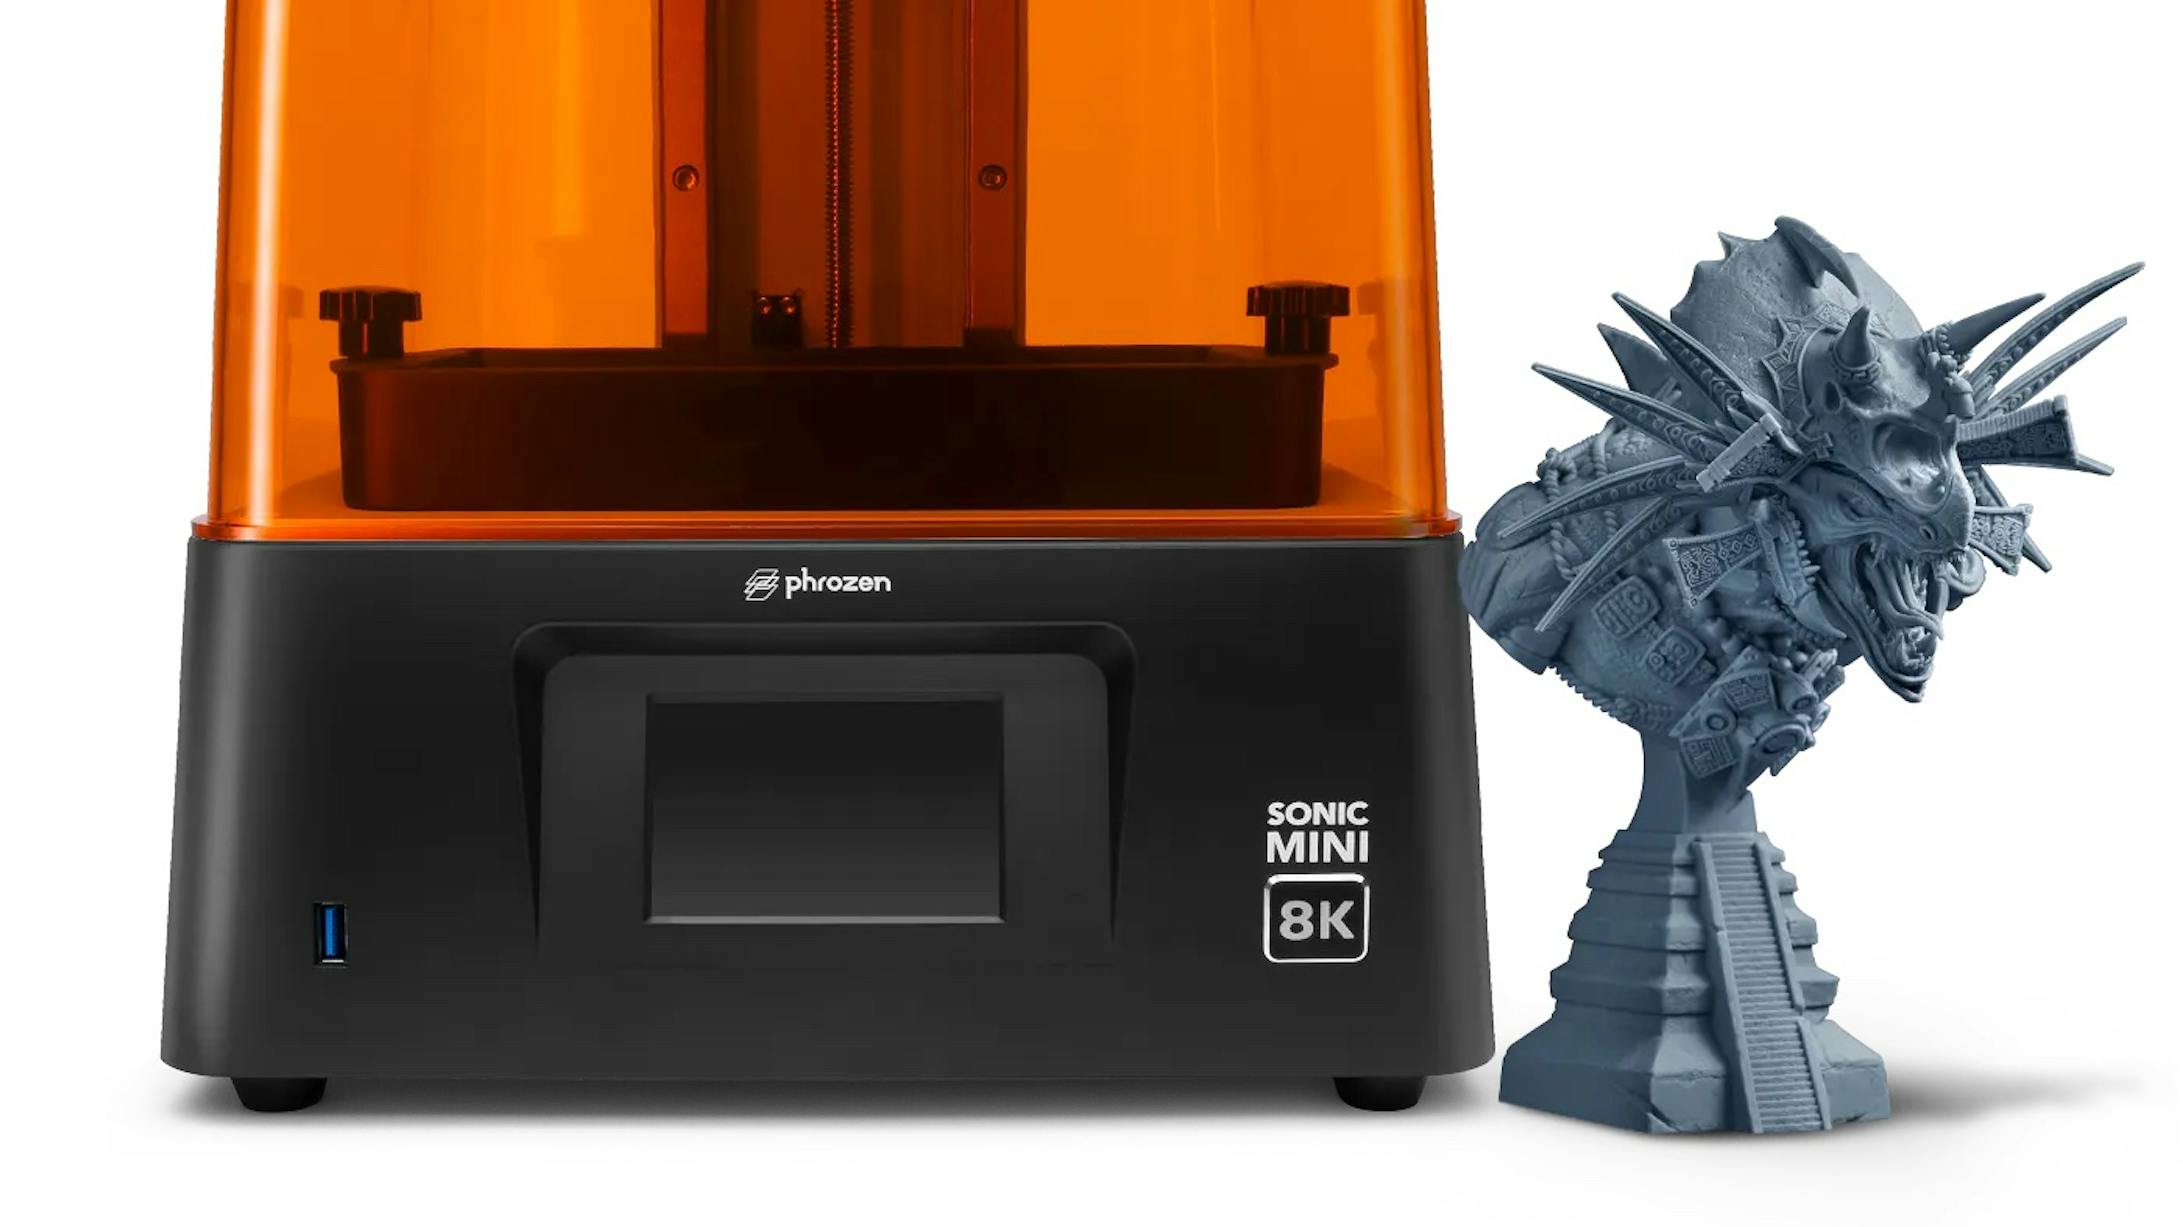 Phrozen 8k Colored Resin Review for Miniatures Like Warhammer